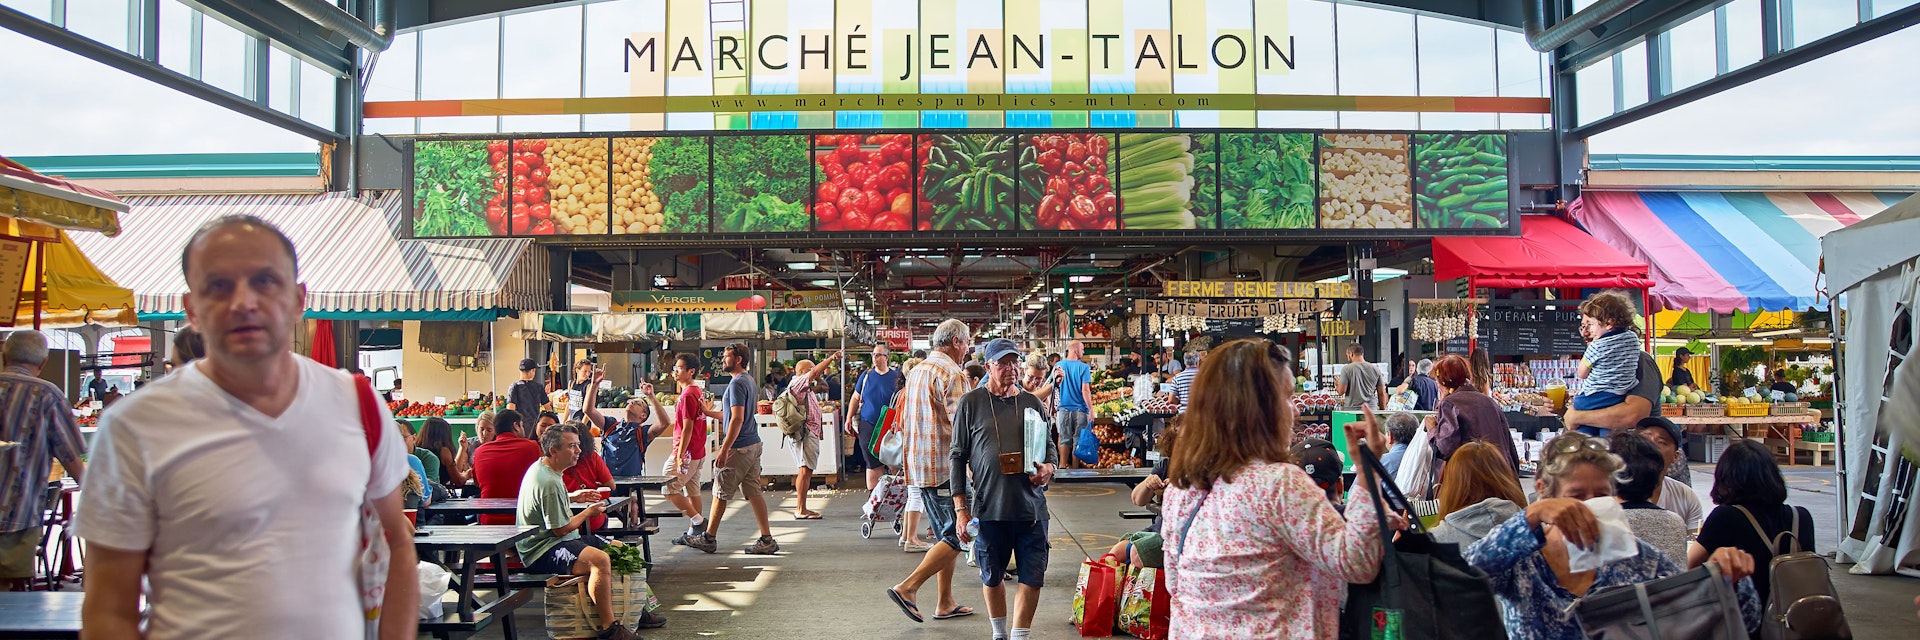 September 29, 2018: Inside the Jean-Talon Market in Montreal.
1363383005
architecture, building, busy, buy, canada, city, cityscape, color, colorful, covered, crowd, display, downtown, entrance, farmer, farmers market, fresh, fruit, grocery, highrise, inside, interior, italy, jean, jean-talon, largest, little, local, marche, market, marketplace, modern, montreal, old, people, place, public, quebec, scene, scenery, scenic, shopping, street, summer, talon, trade, urban, vegetable, view, walking